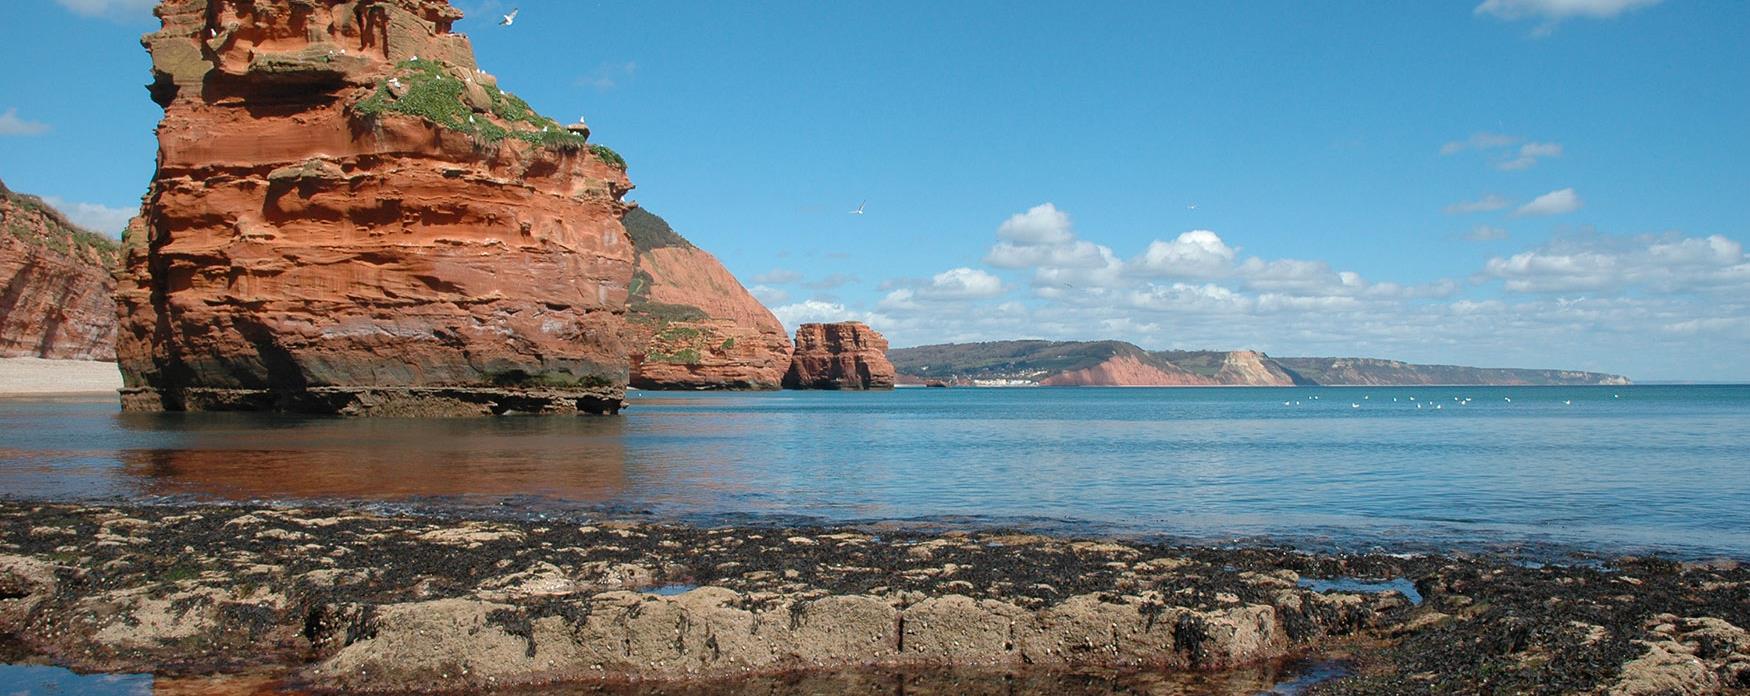 View of the cliffs, beach and sea along the Jurassic Coast